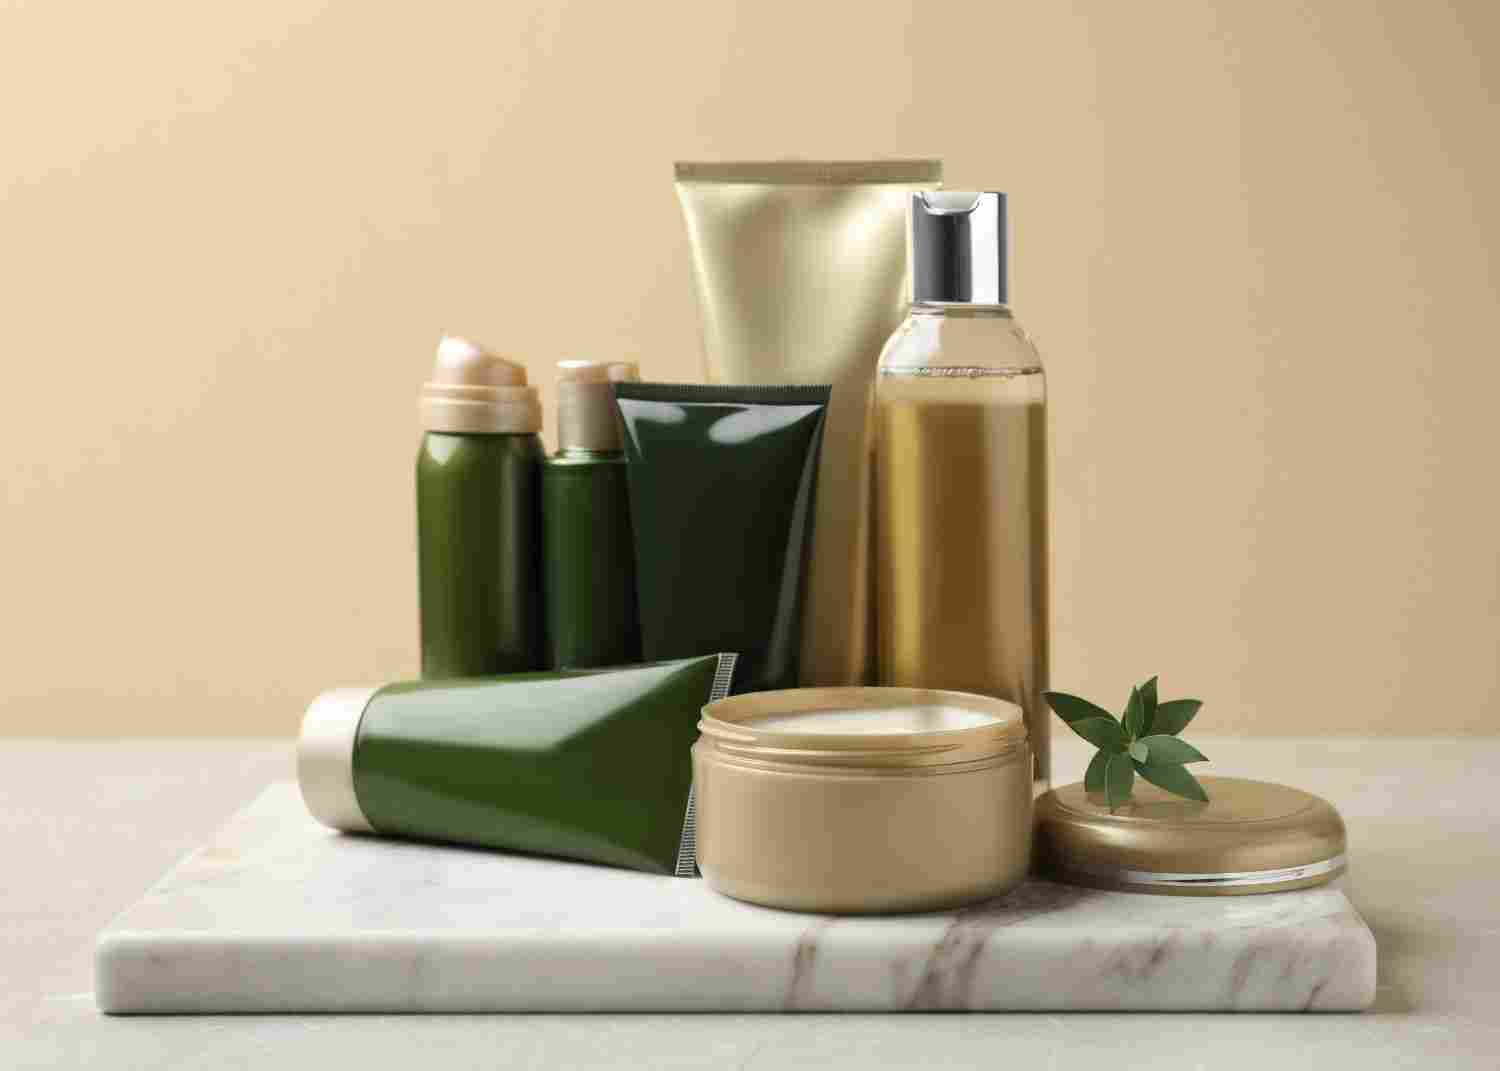 Reasons Why You Should Buy Spa Supplies in Bulk